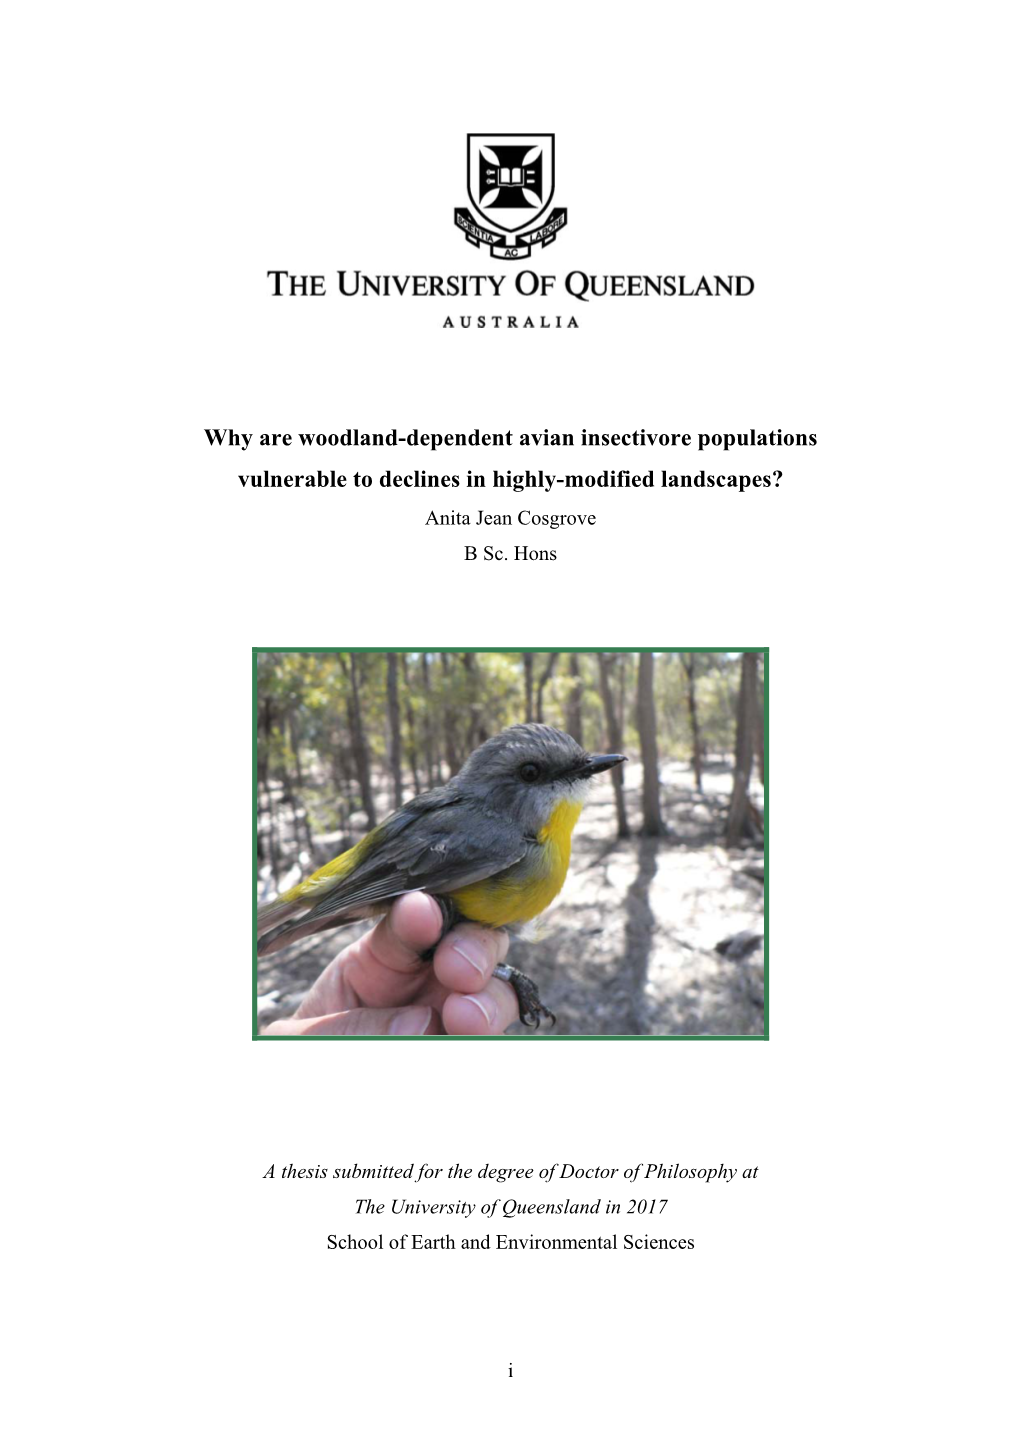 Why Are Woodland-Dependent Avian Insectivore Populations Vulnerable to Declines in Highly-Modified Landscapes? Anita Jean Cosgrove B Sc